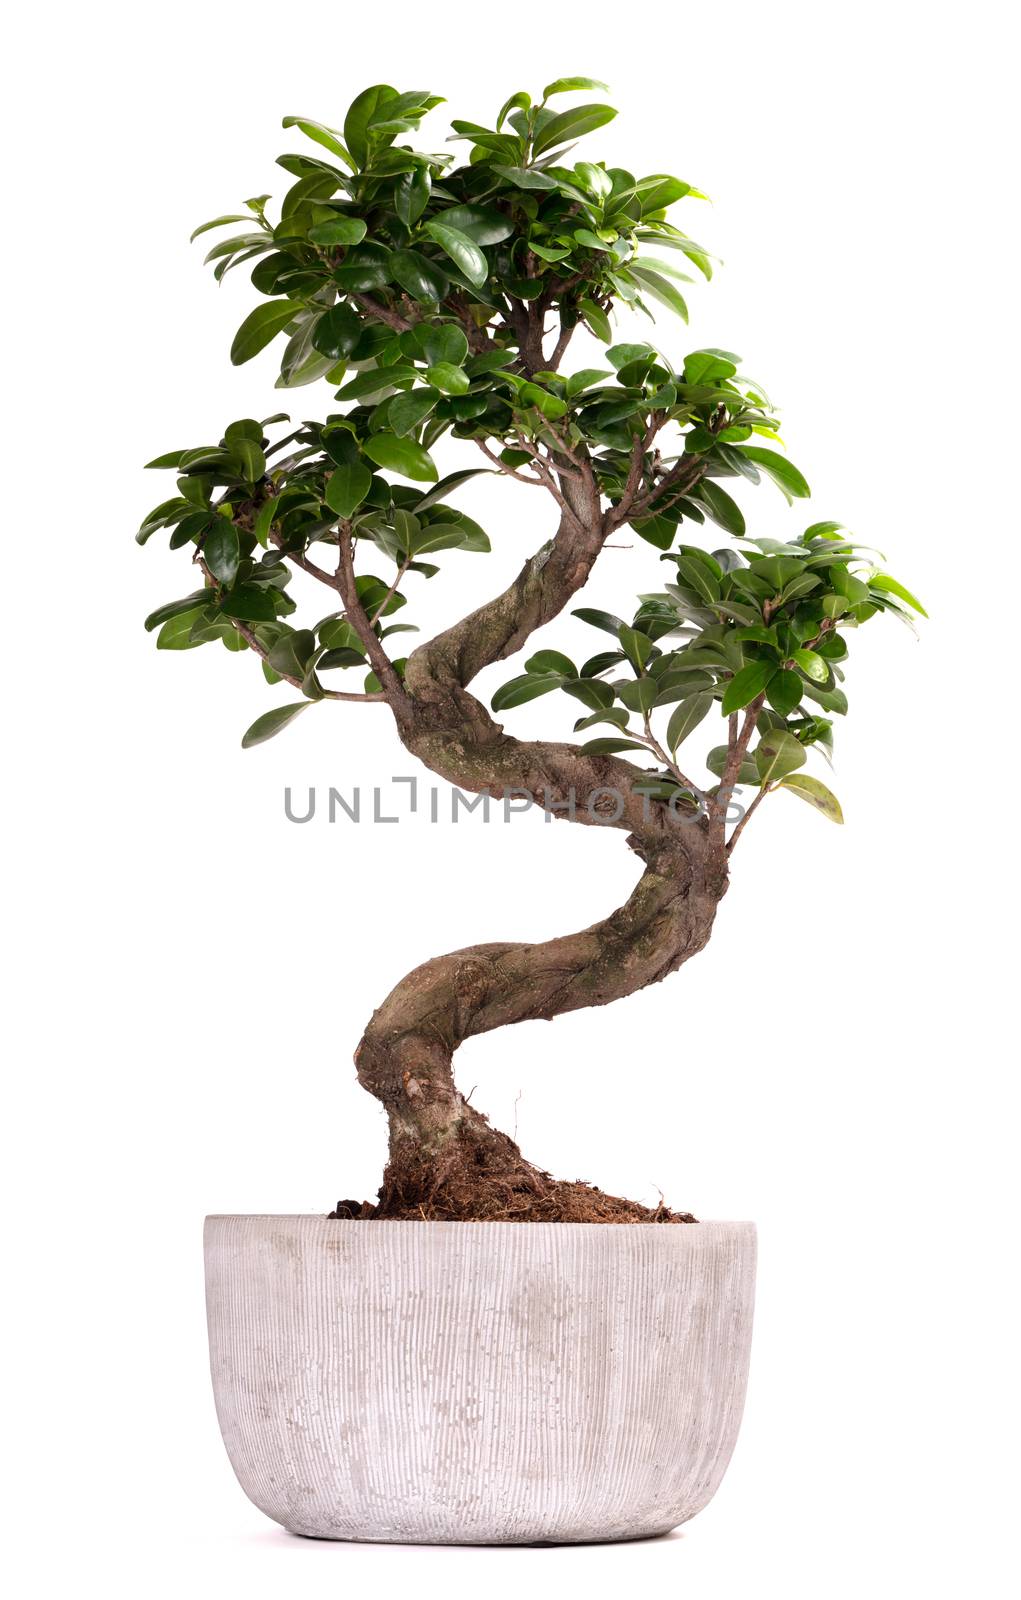 Bonsai tree potted plant by michaklootwijk